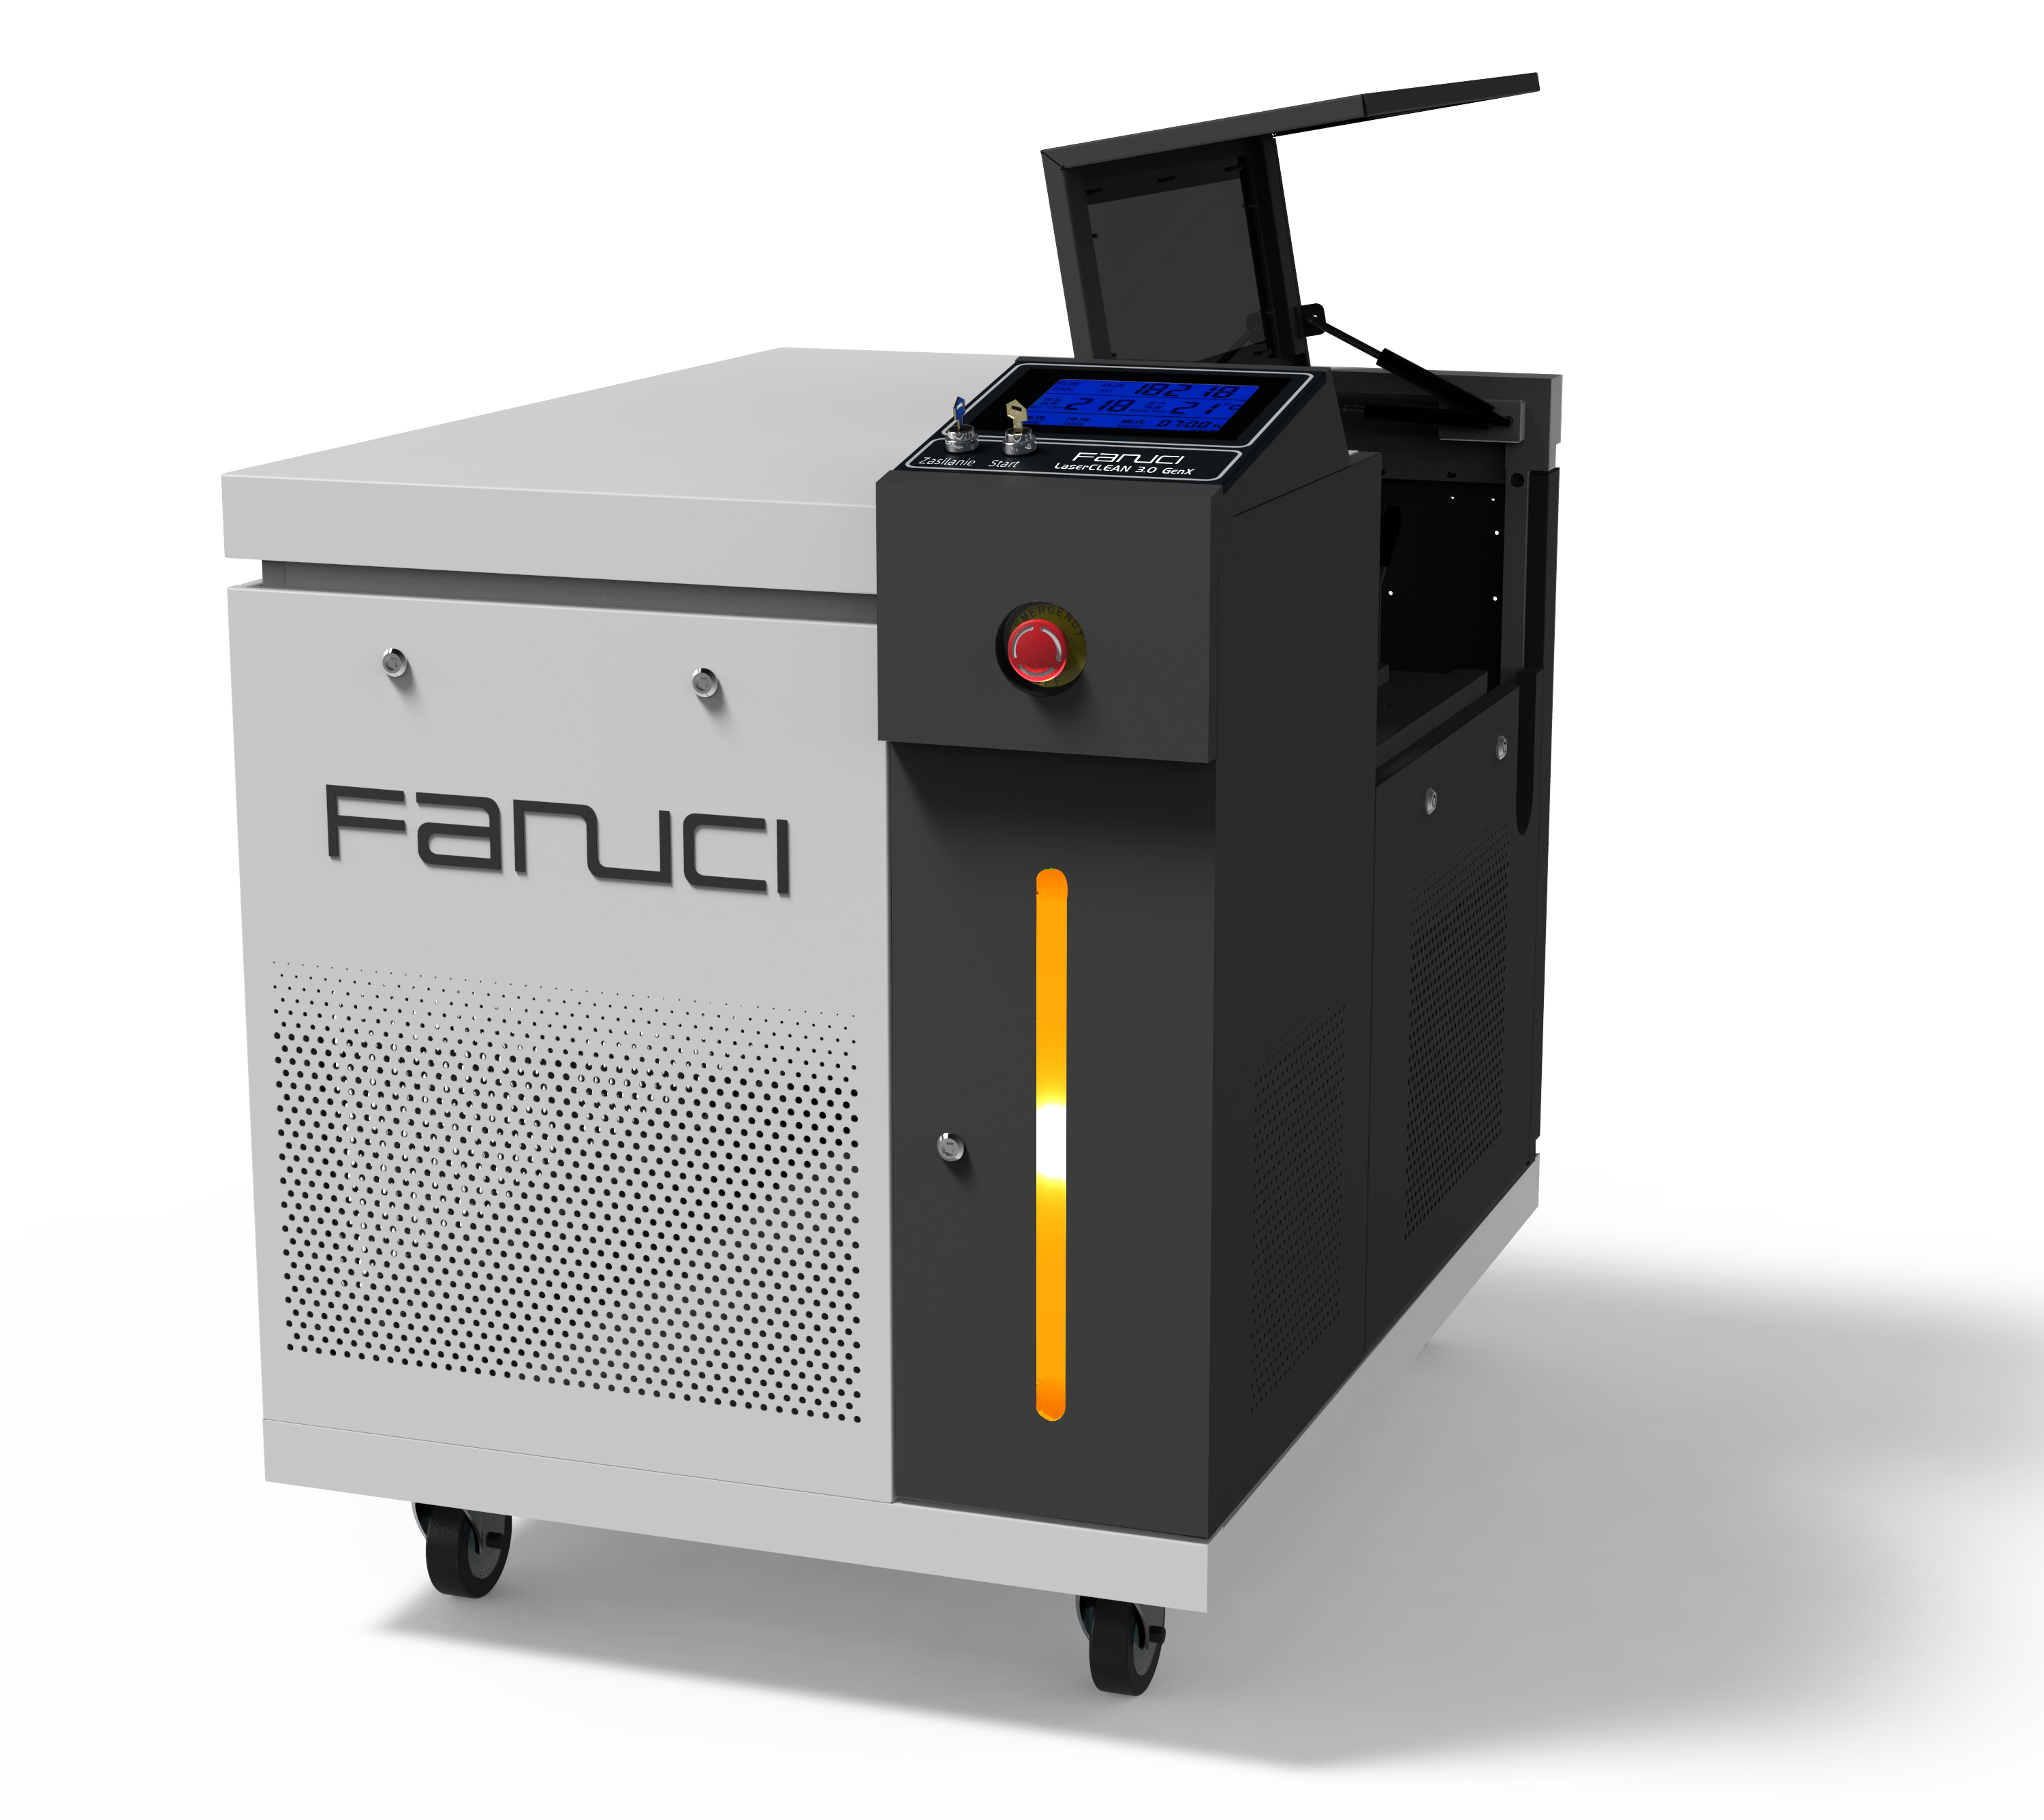 FANUCI® Pro Compact Laser Welding Machine Four In One Will Be Shipped To Europe